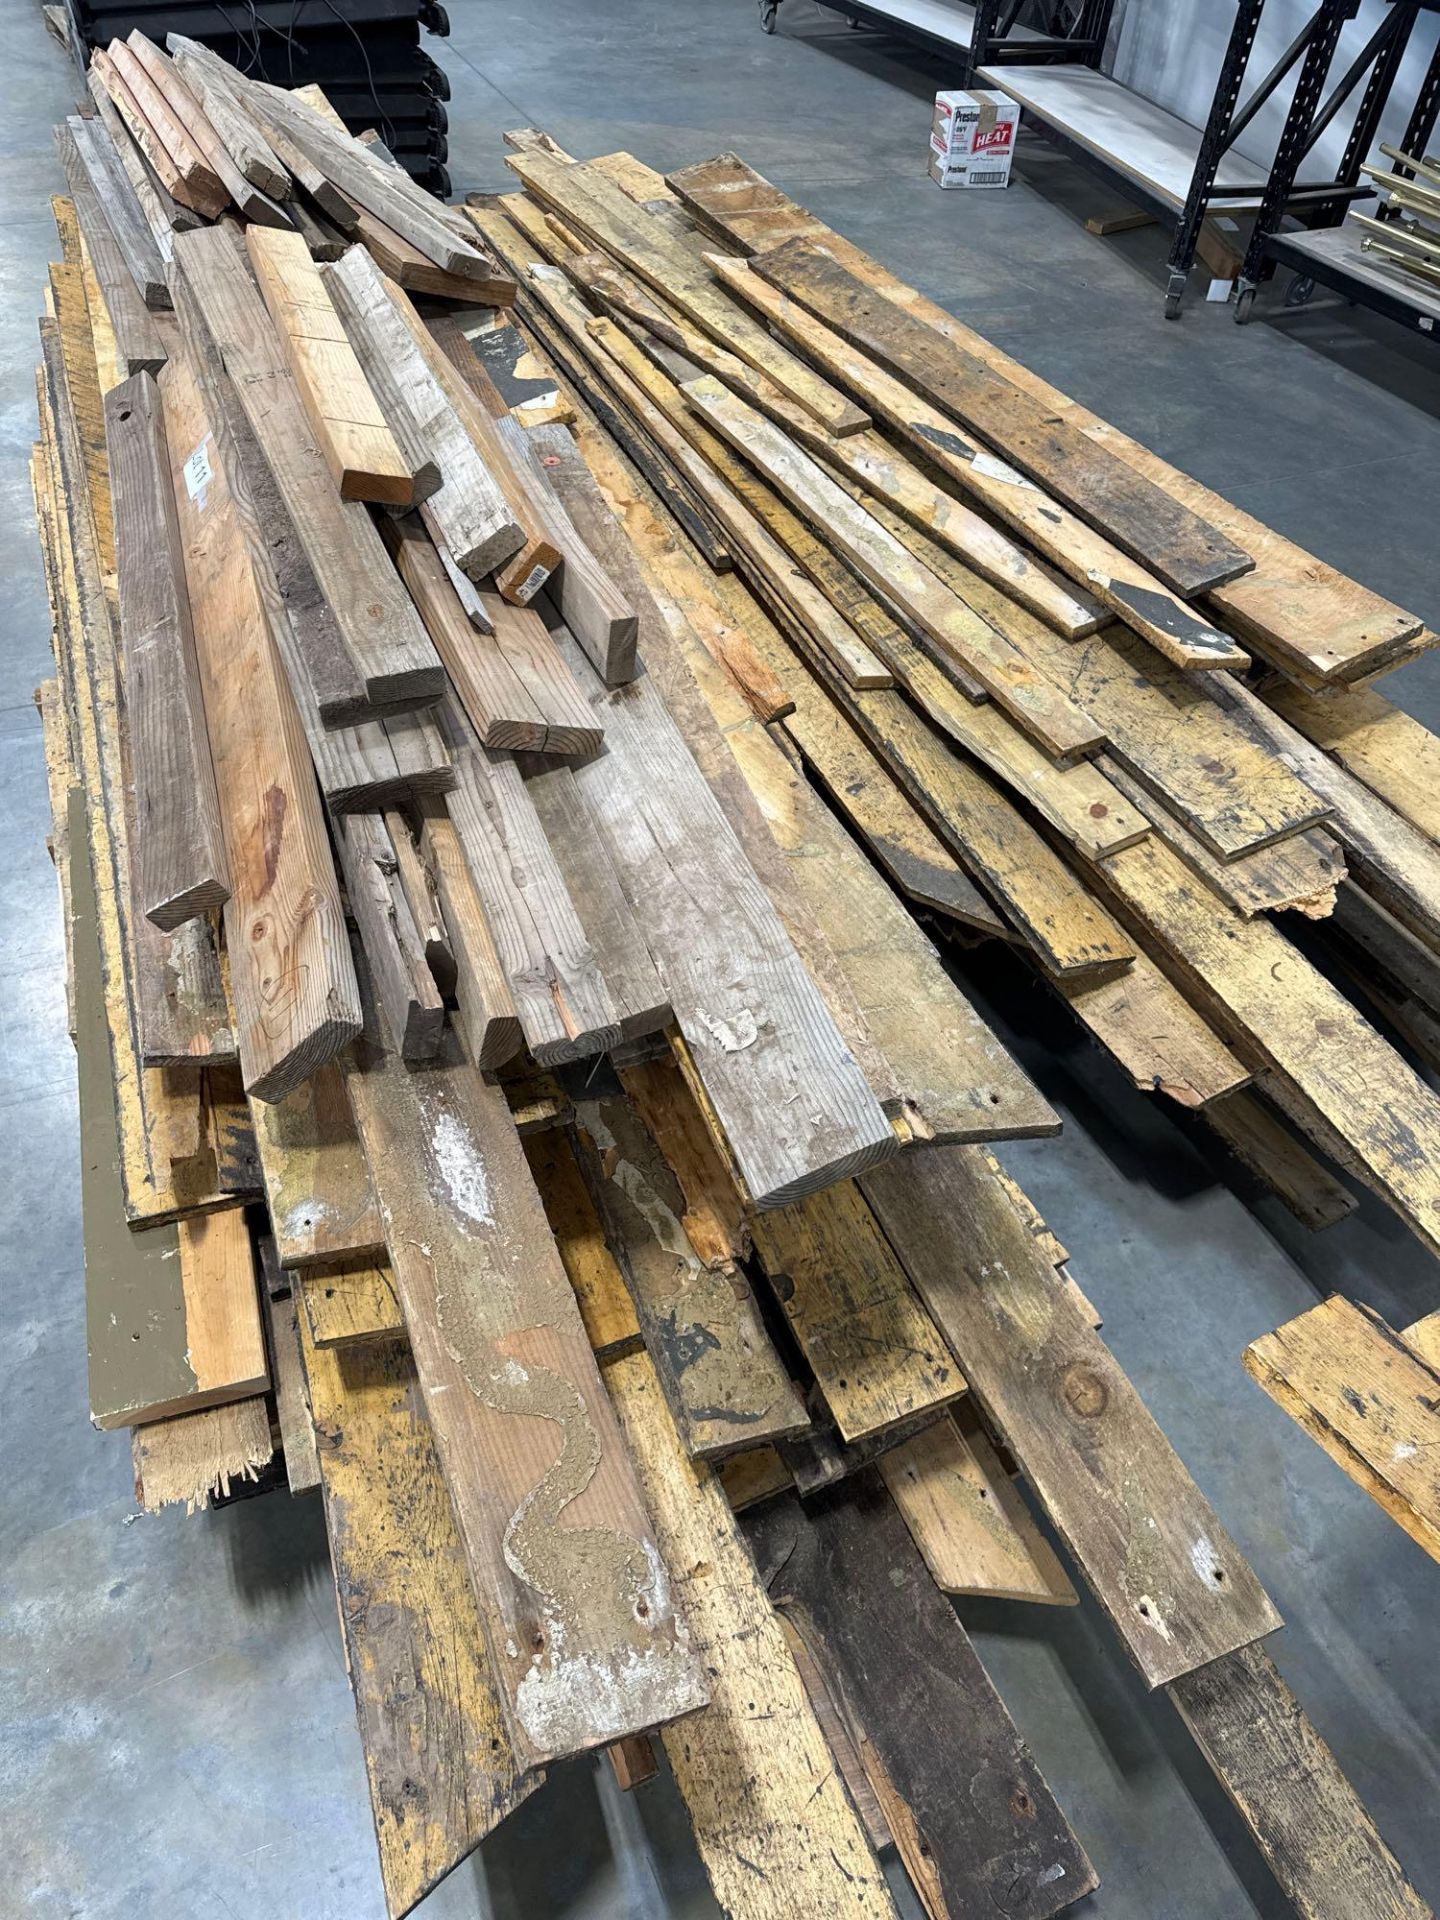 Two stacks of Reclaimed flooring from claim jumper steak house - Image 5 of 5